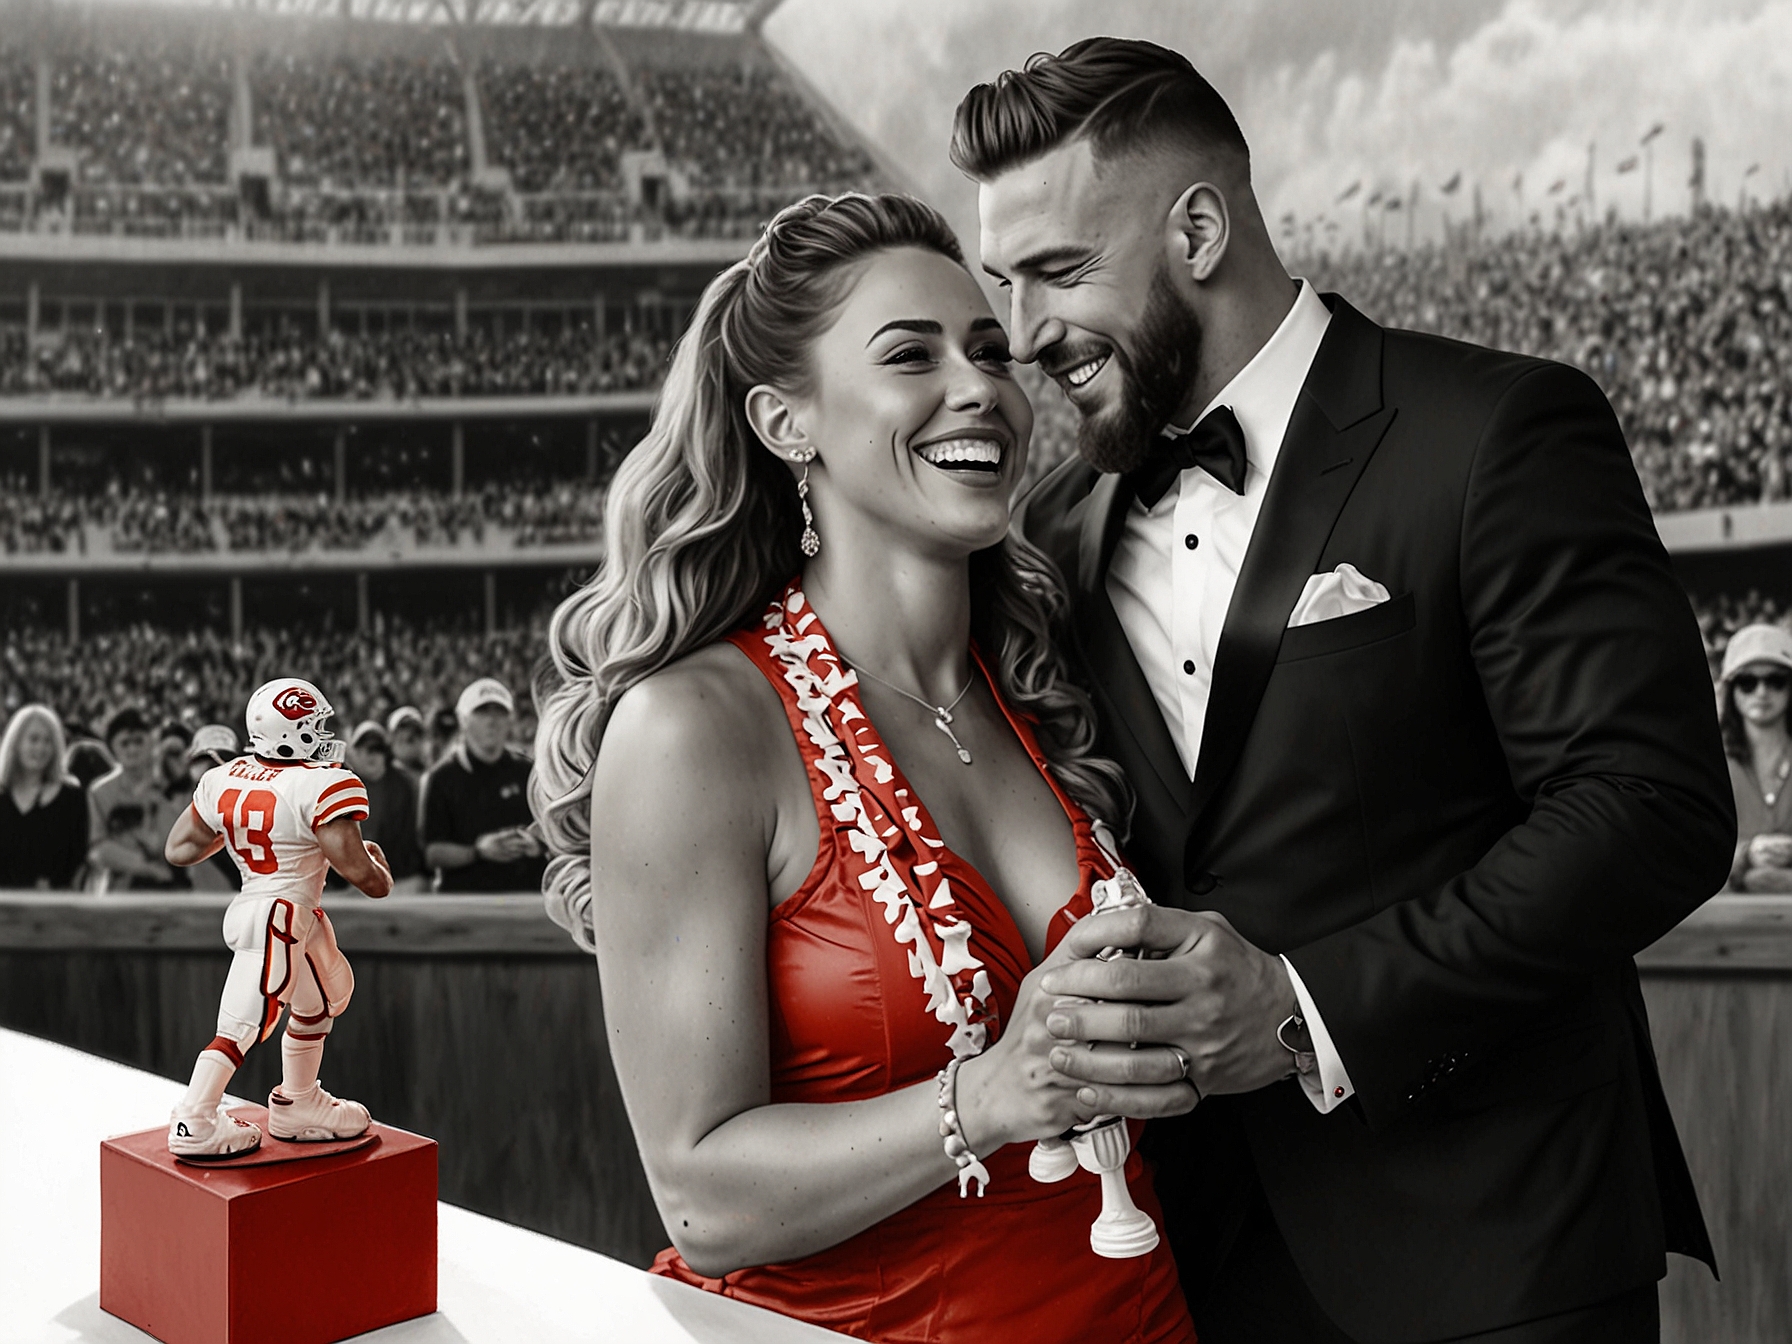 Brittany Mahomes playfully displays a Travis Kelce action figure at the ceremony, adding a lighthearted touch and highlighting the camaraderie within the Chiefs team.